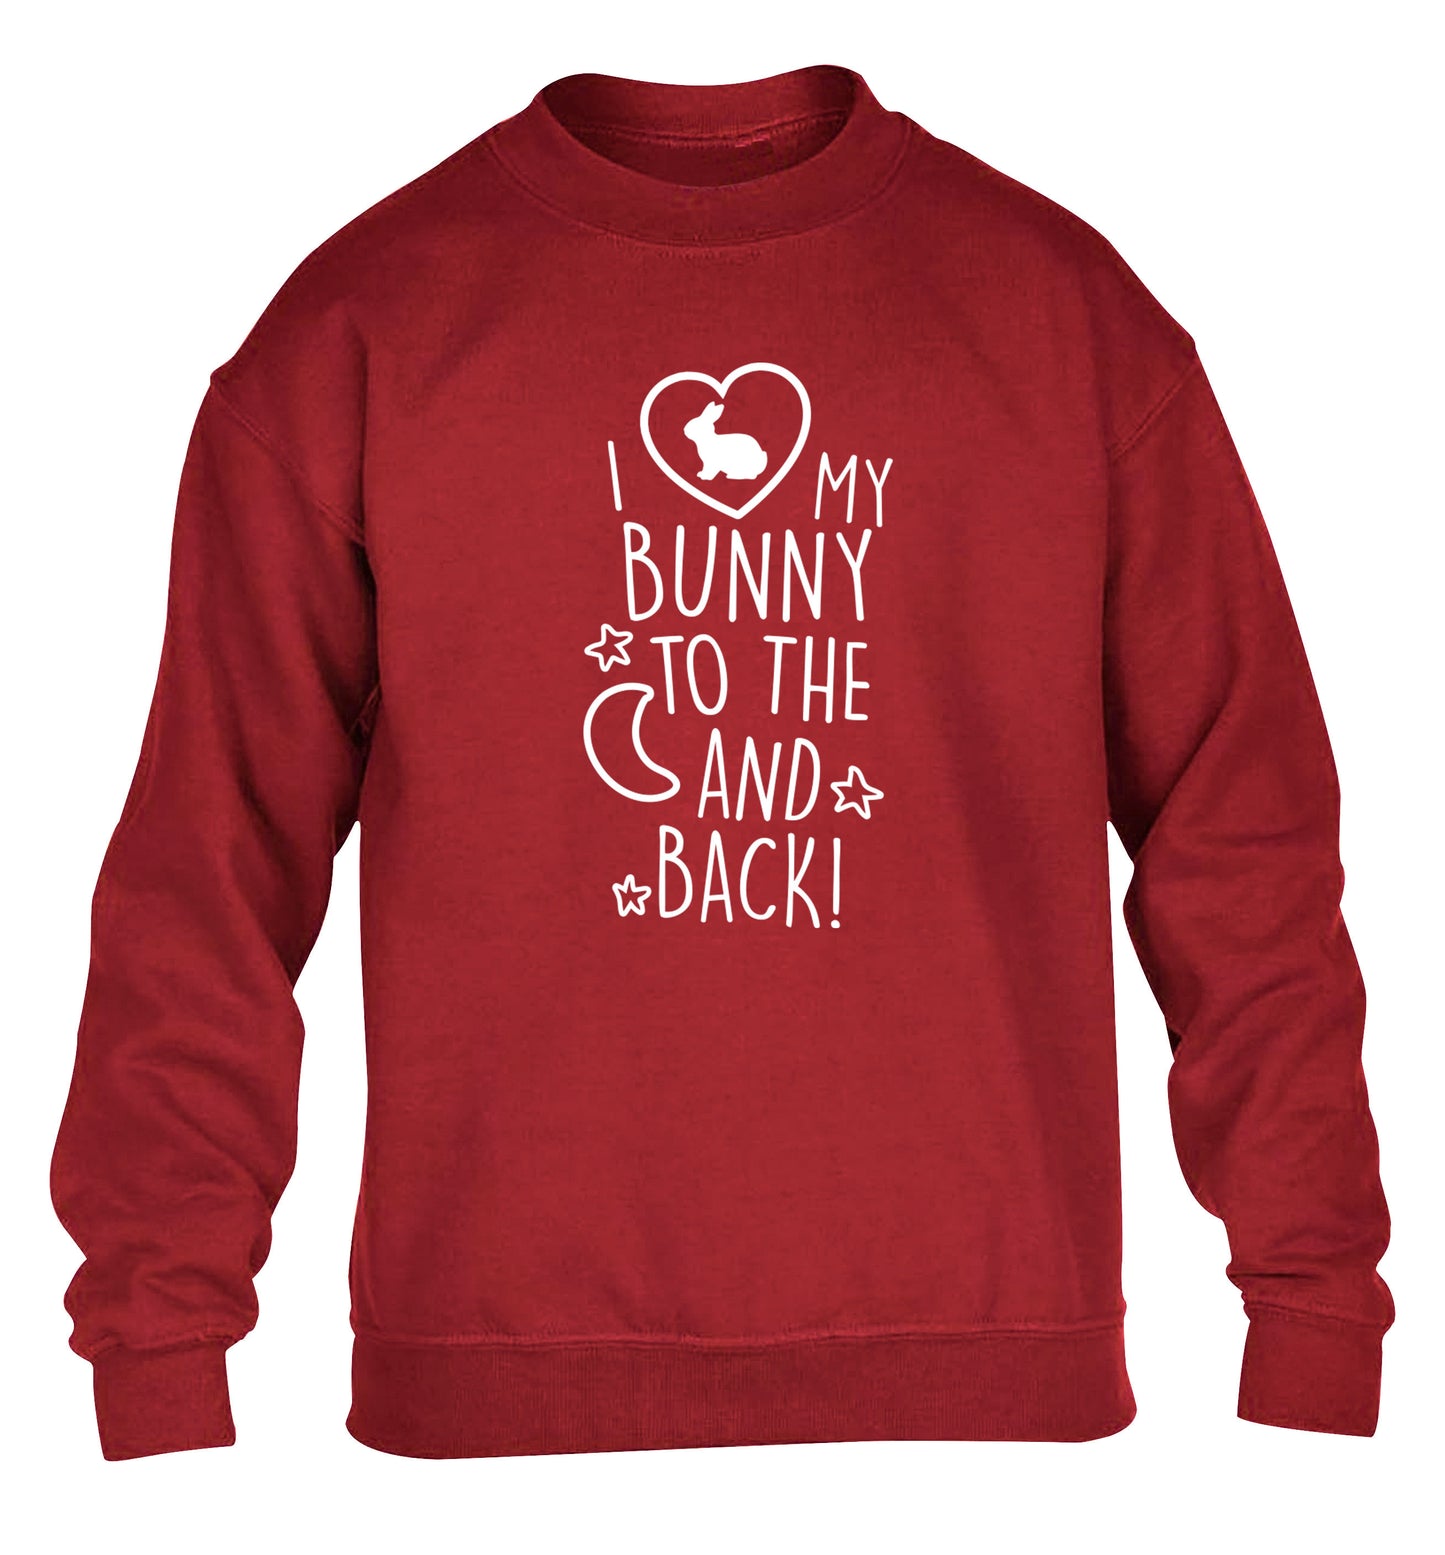 I love my bunny to the moon and back children's grey  sweater 12-14 Years